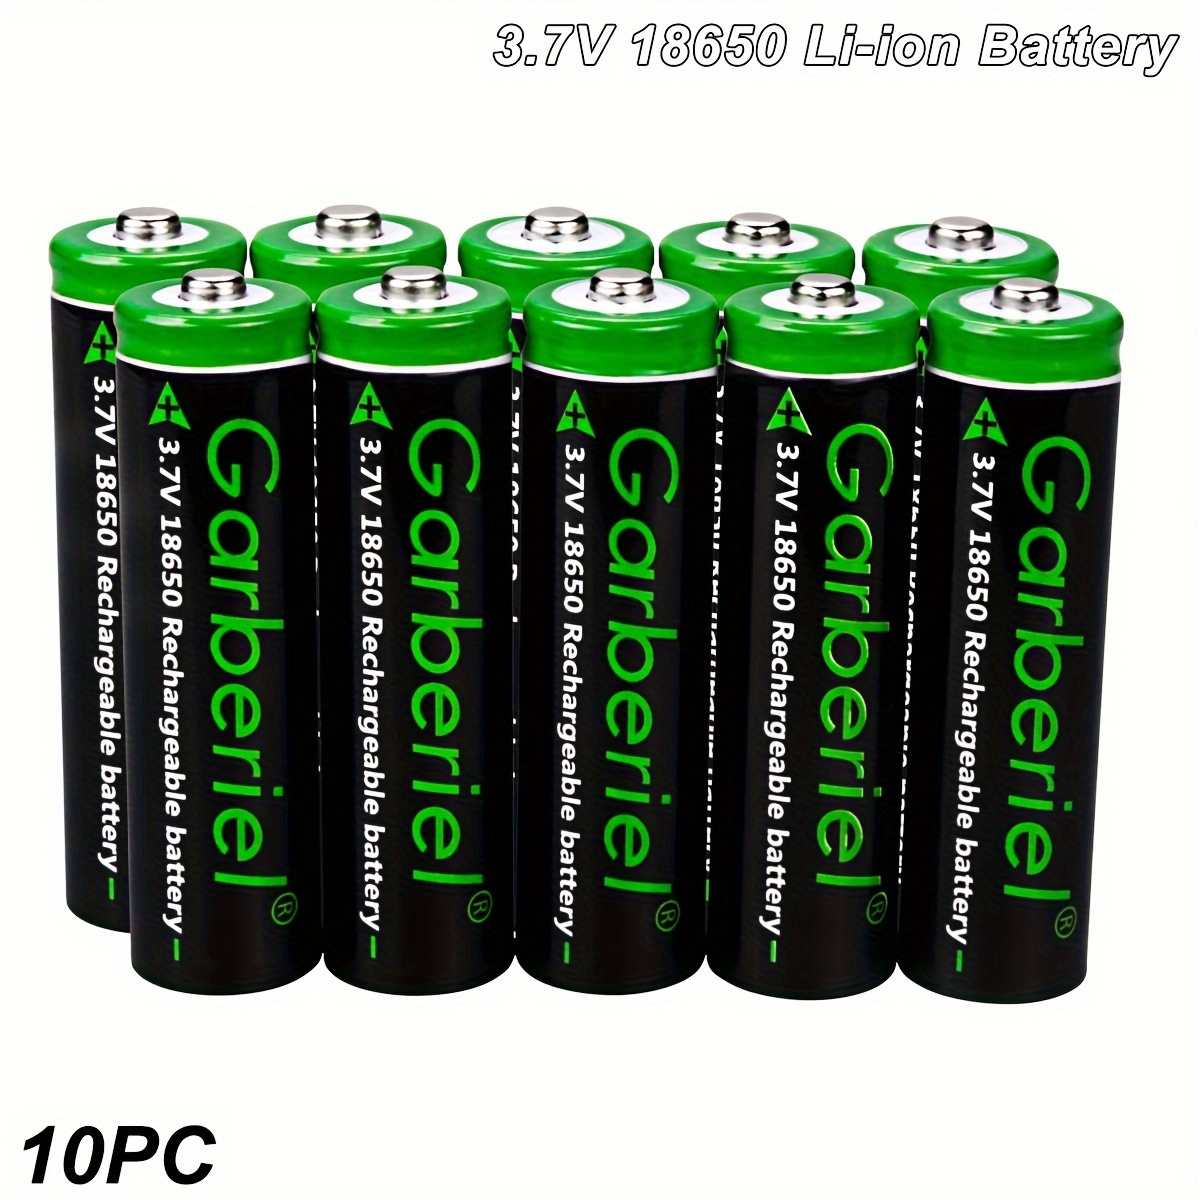 

10pcs Garberiel 3.7v 18650 Batteries, 3000mah High Capacity Button Top Rechargeable 18650 Battery For Flashlights, Headlamps, Rc Cars, Remote Control And More